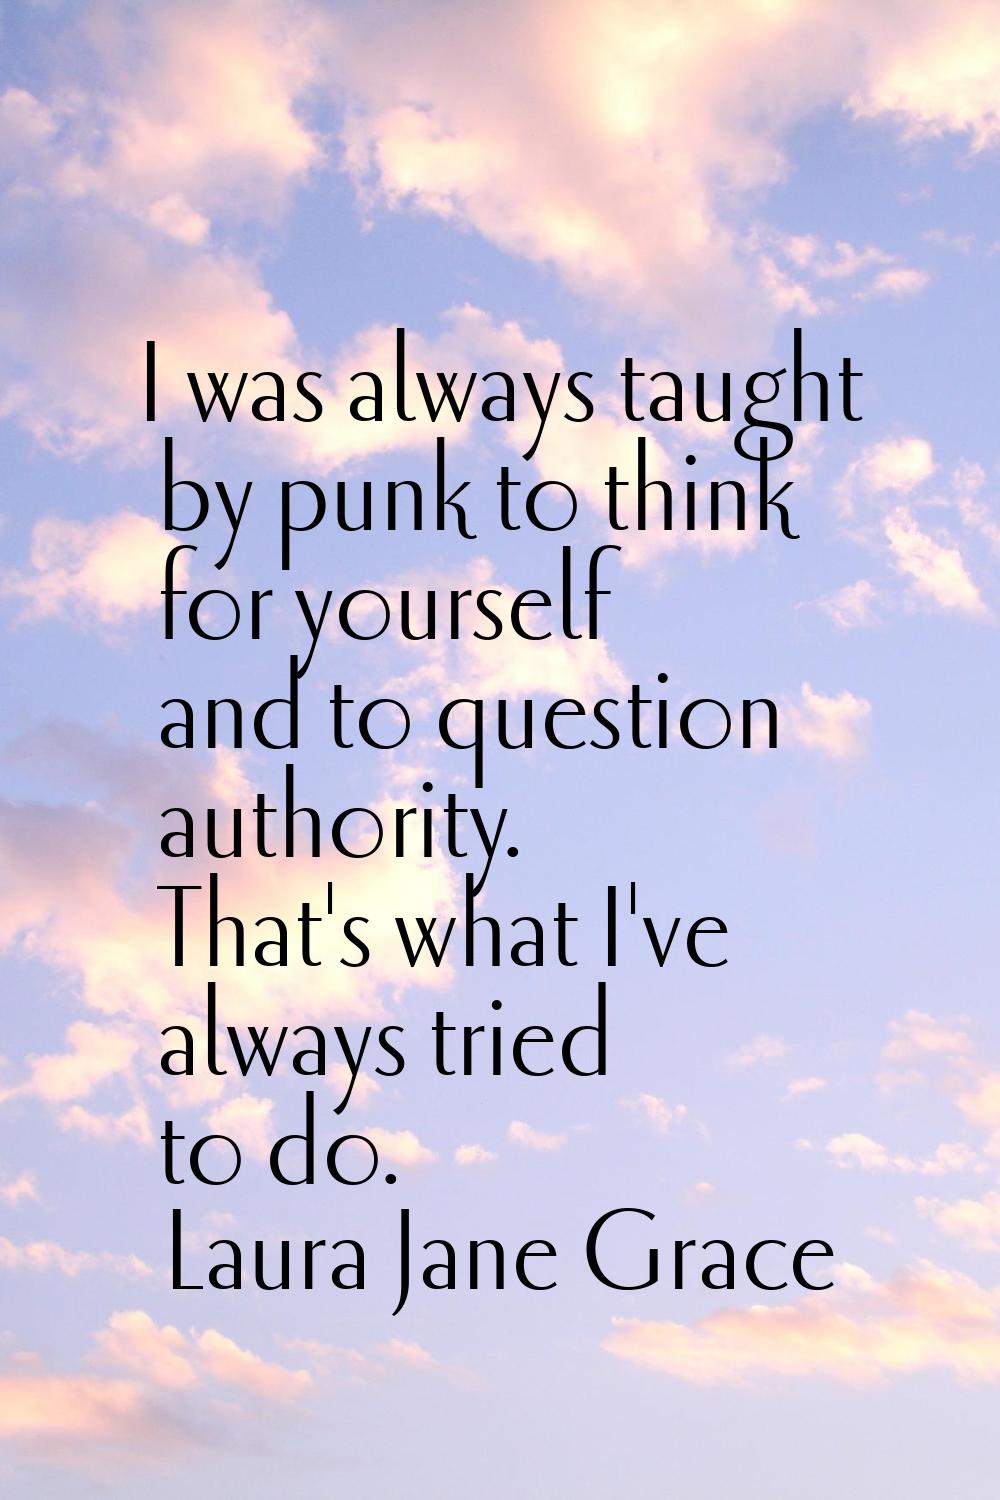 I was always taught by punk to think for yourself and to question authority. That's what I've alway